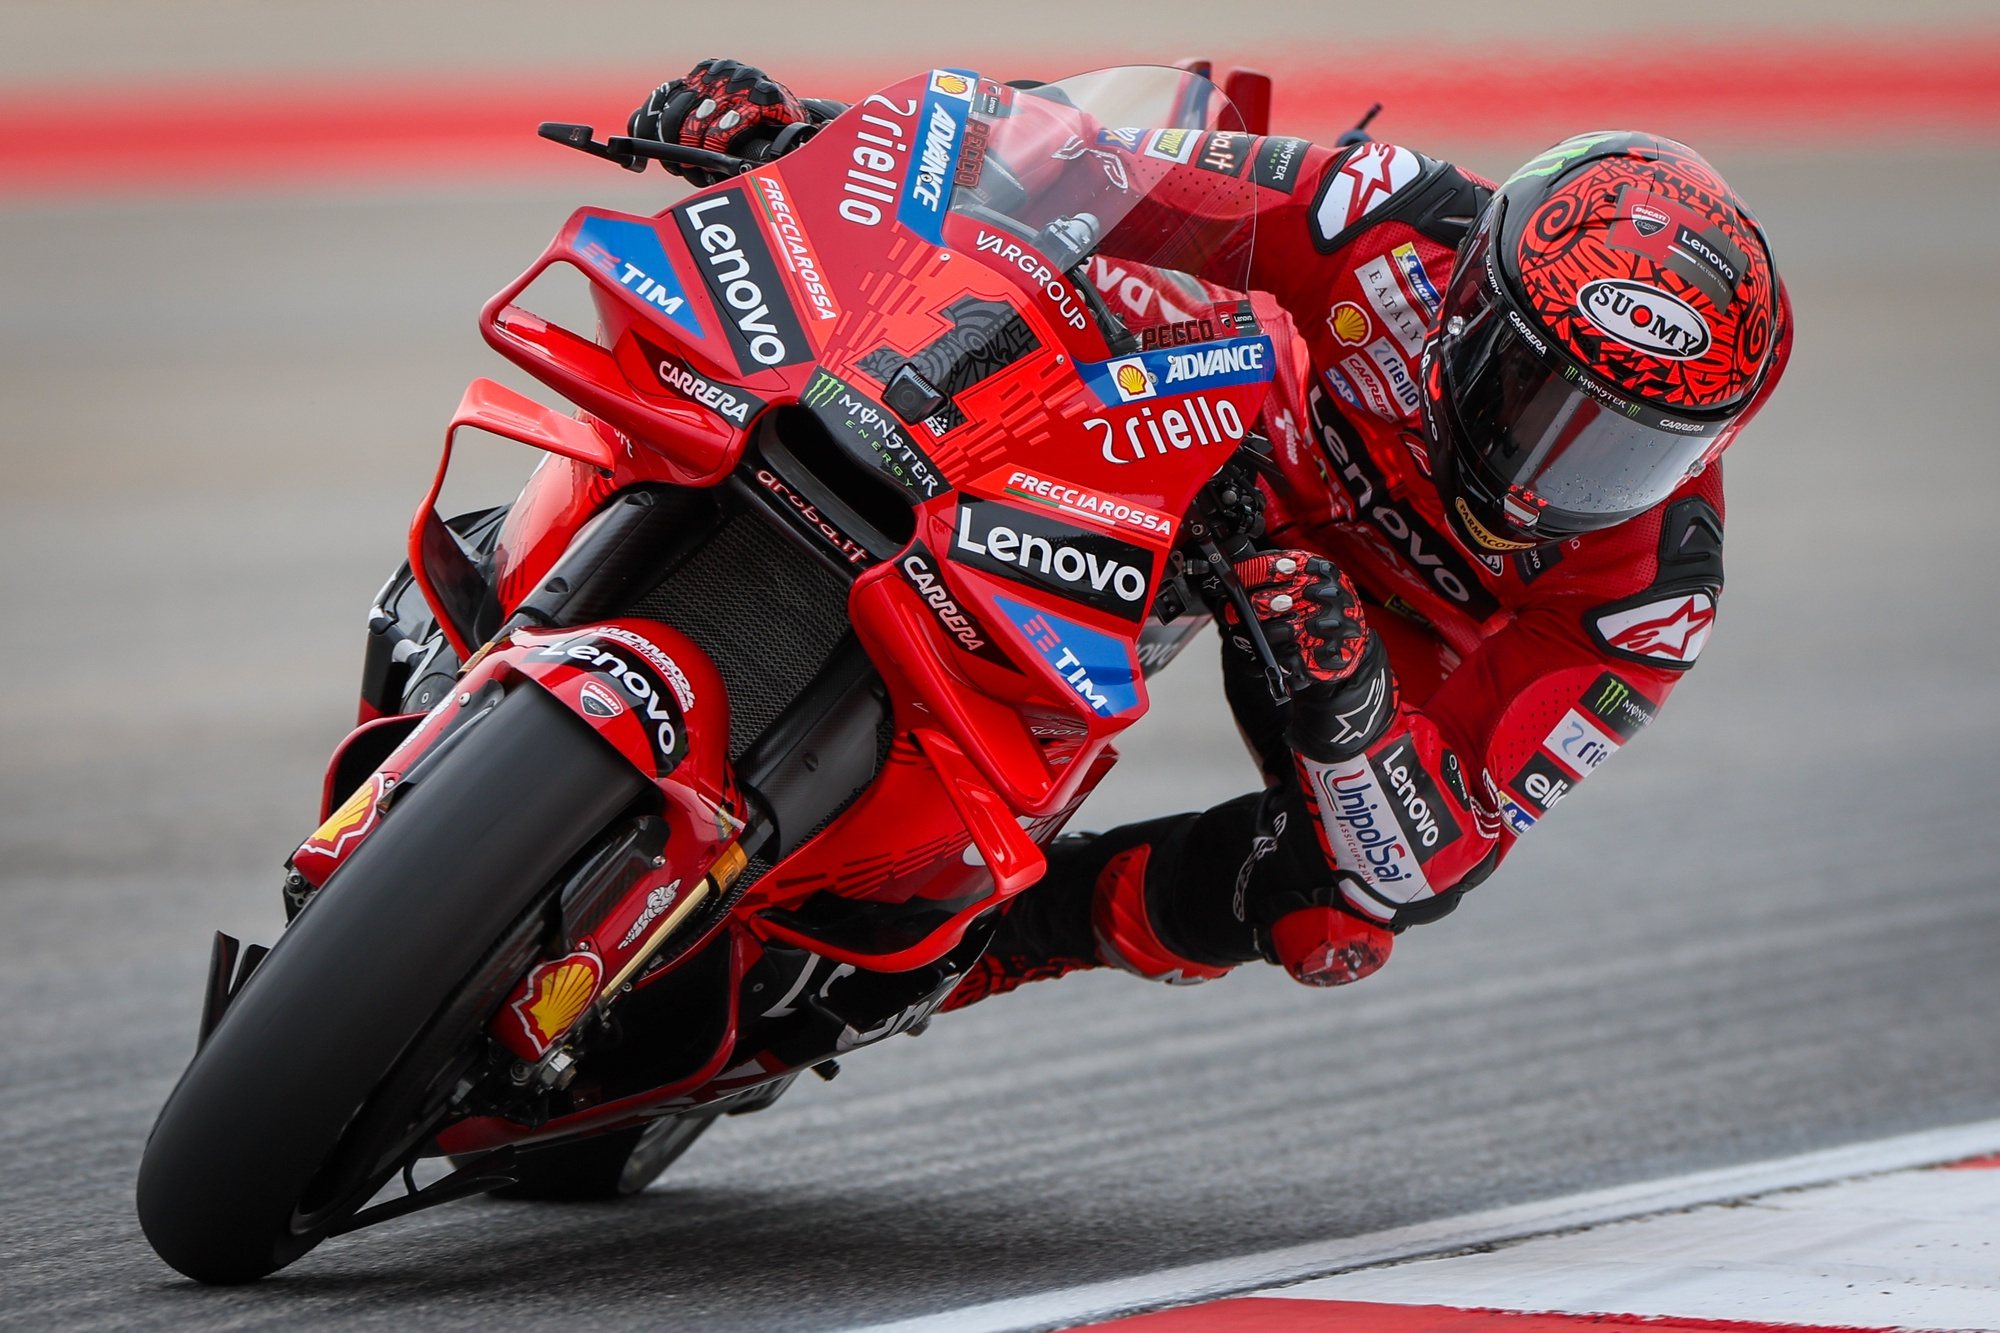 Francesco Bagnaia of Italy and Ducati Lenovo Team in action during the free practice session of the Motorcycling Grand Prix of Portugal, in Portimao, Portugal, 22 March 2024. The 2024 Motorcycling Grand Prix of Portugal is held on 24 March. JOSE SENA GOULAO/LUSA